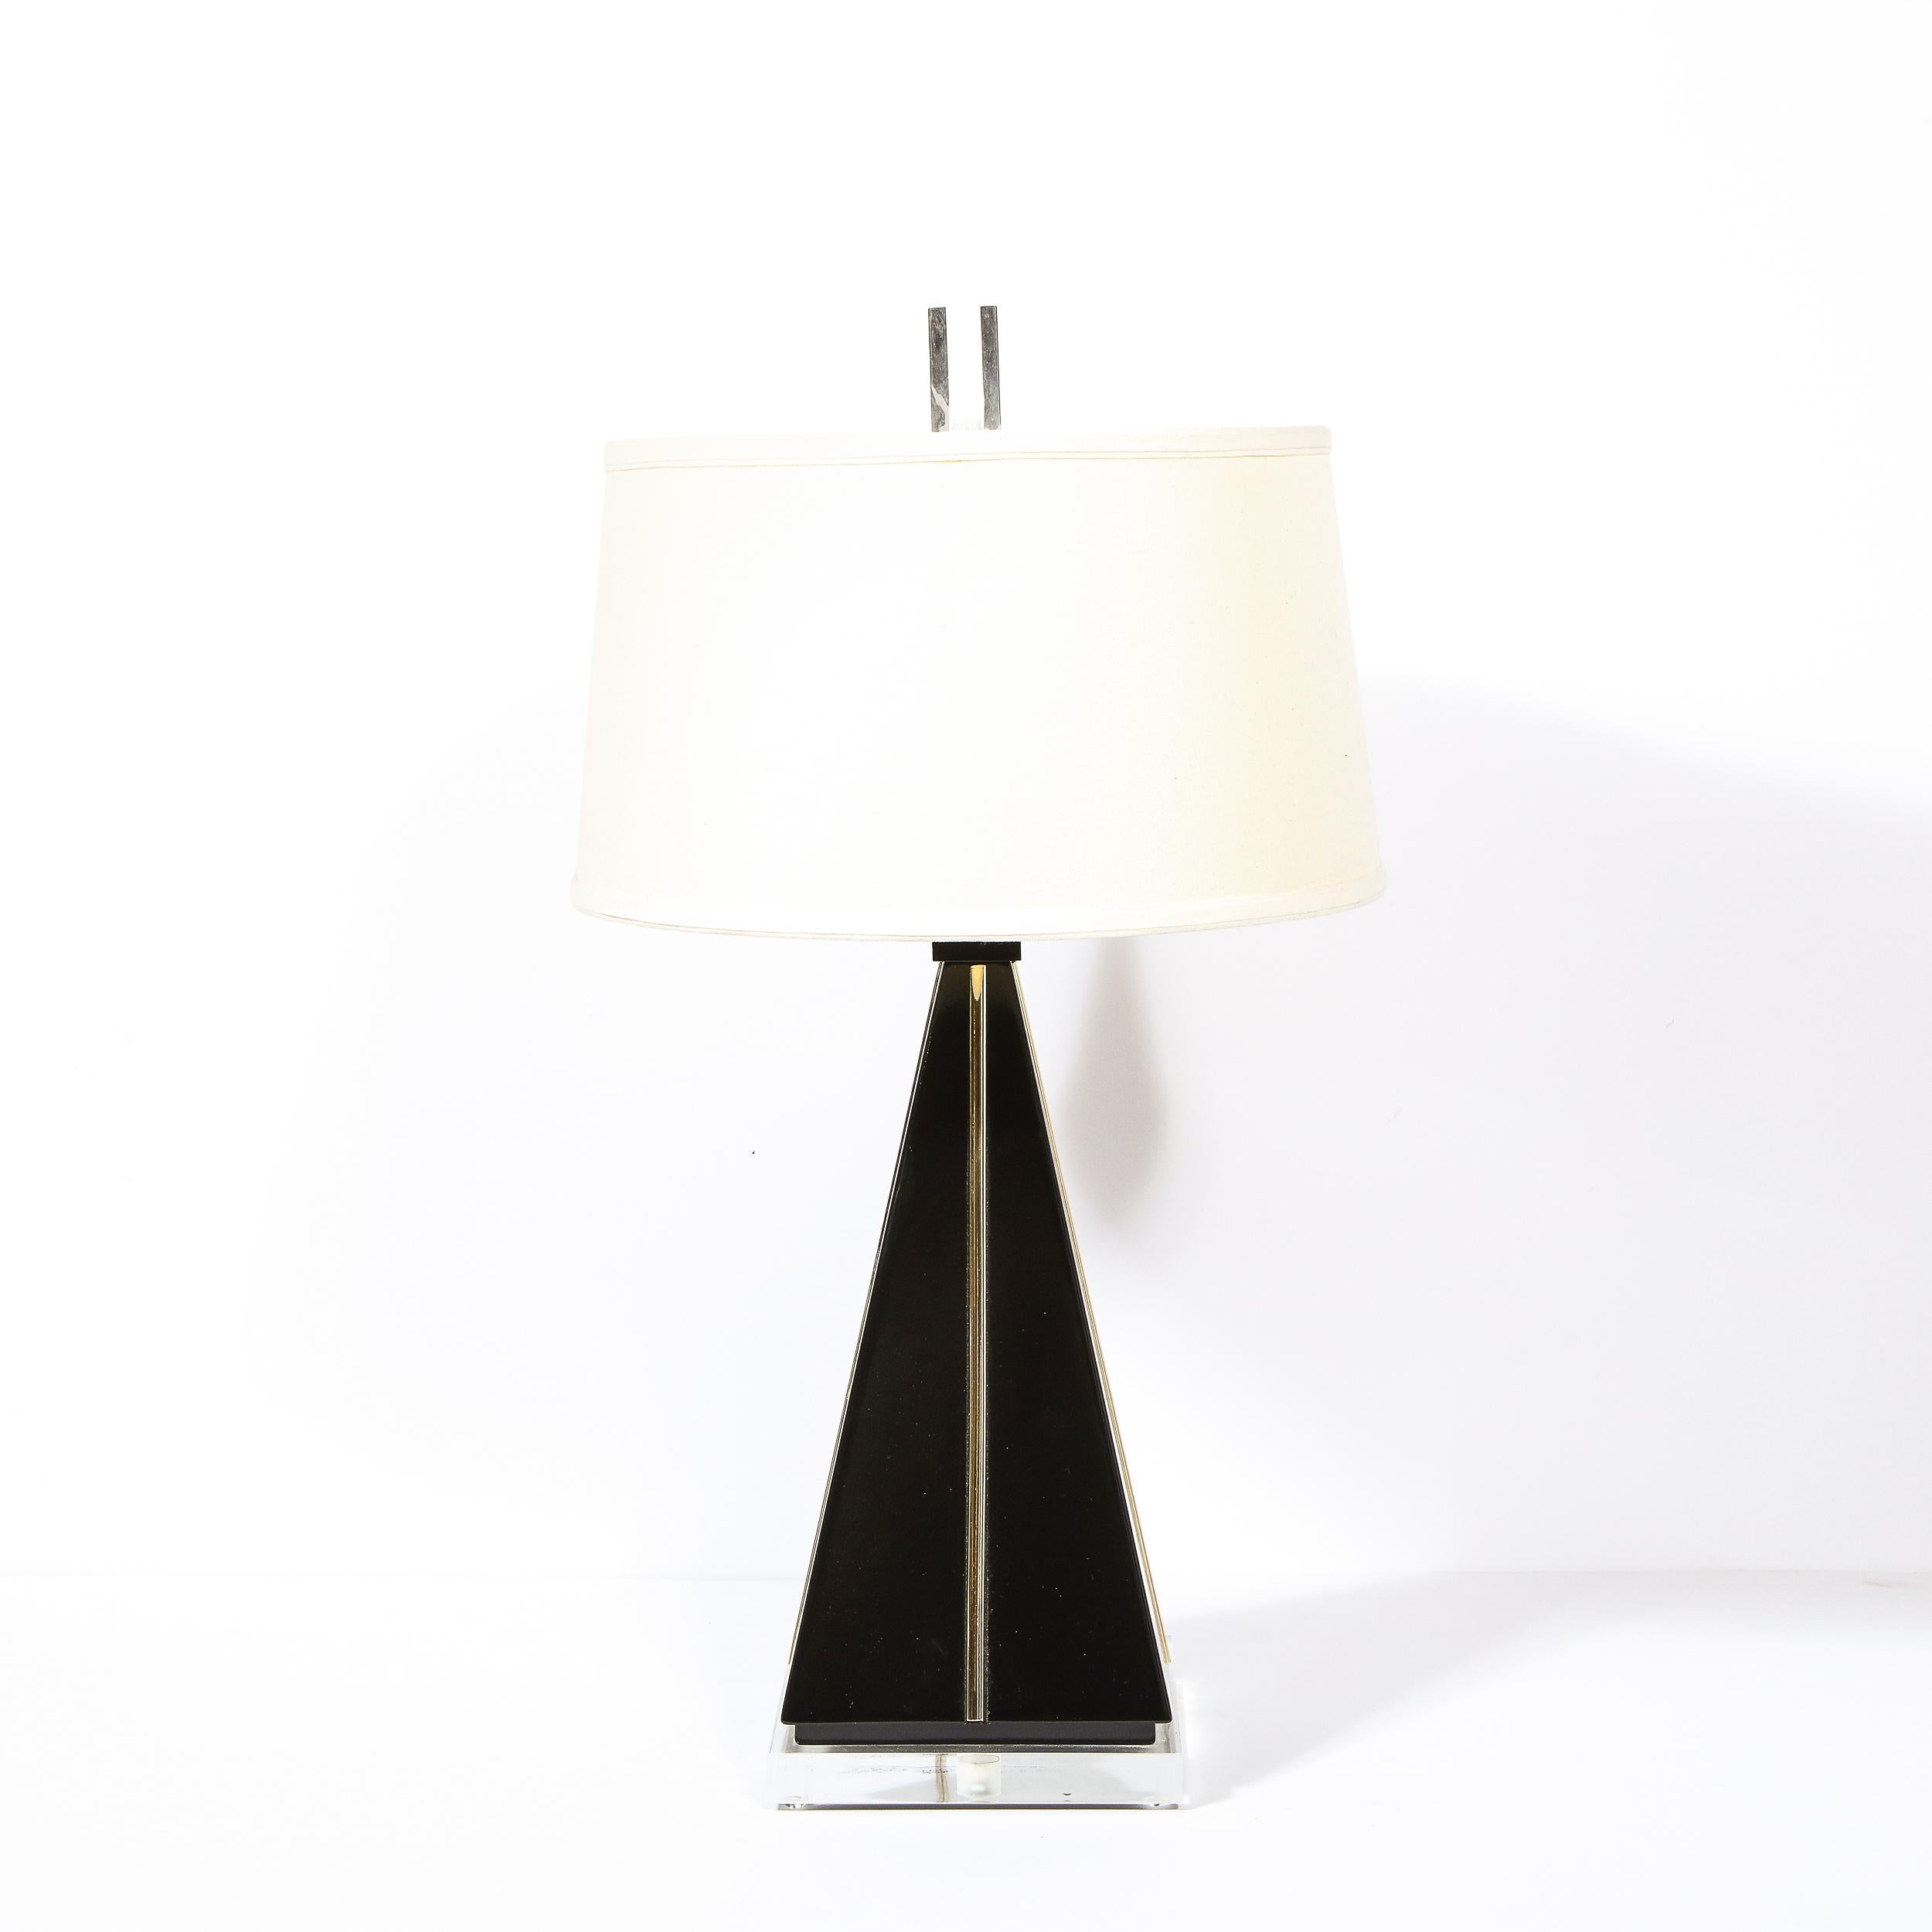 This stunning modernist lamp was realized in the United States, during the latter half of the 20th century. It features a lucite base from which a pyramid body ascends finished in black lacquer with rectilinear gilded resin detailing. The lamp comes